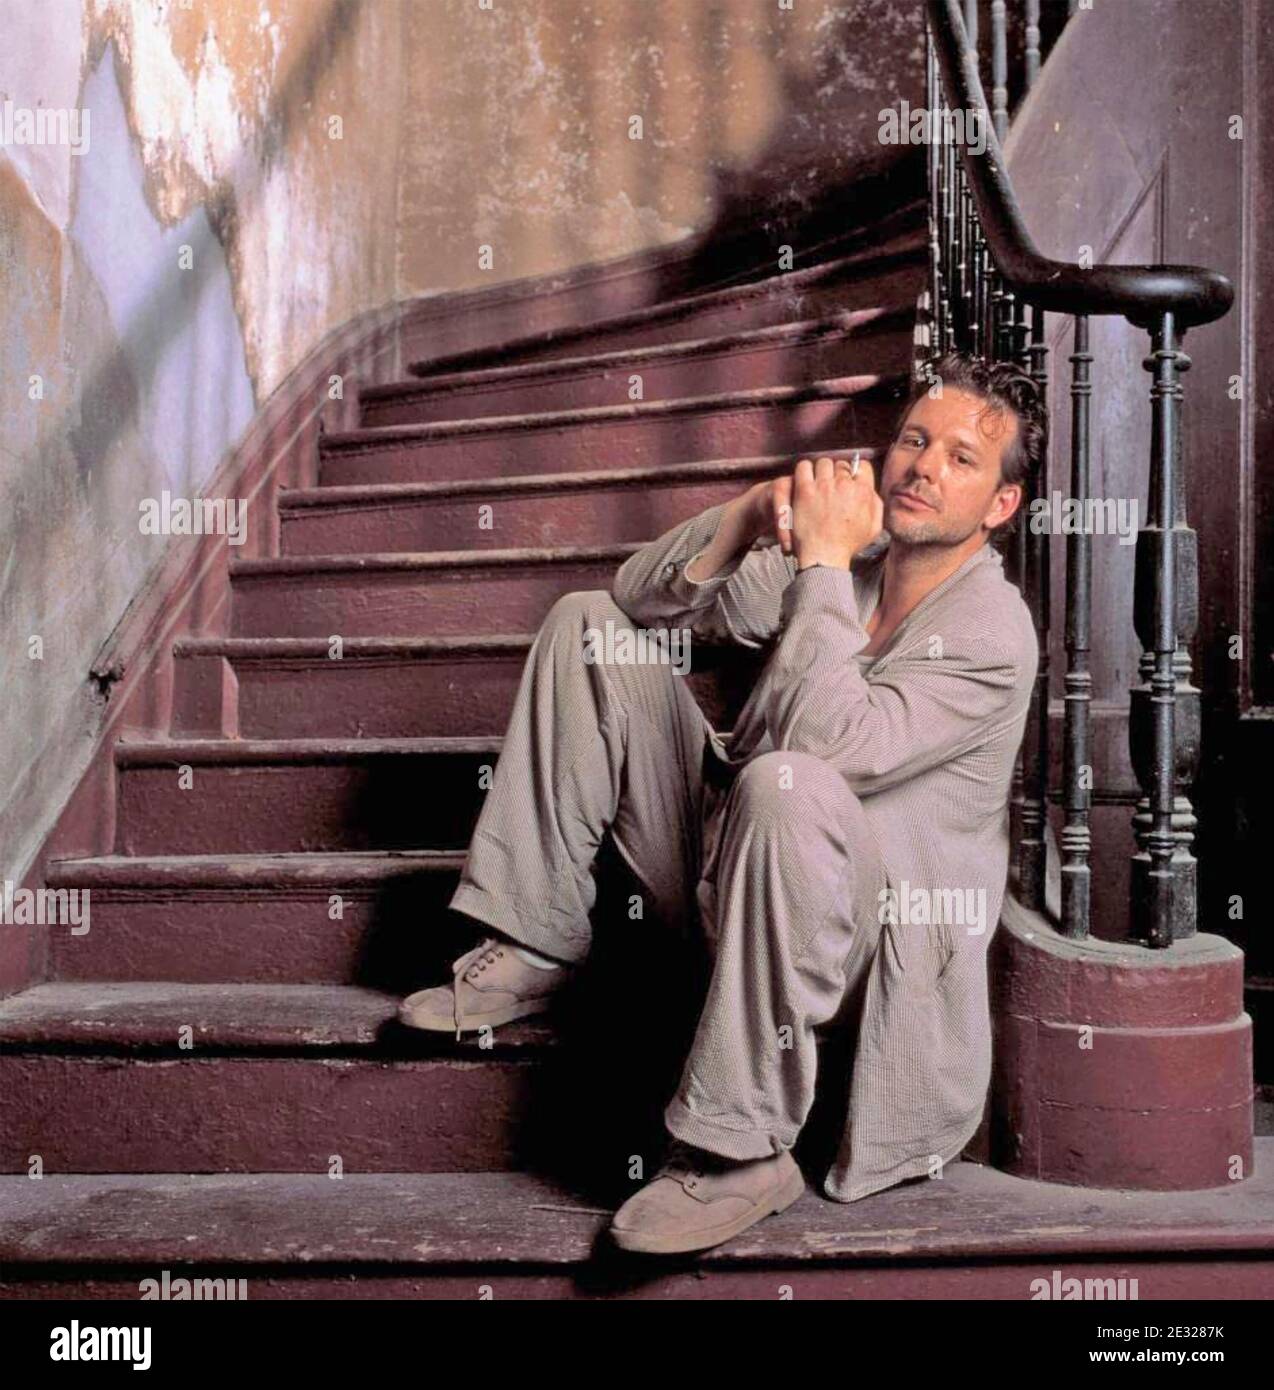 ANGEL HEART 1987 tr-Star Pictures film avec Mickey Rourke Banque D'Images